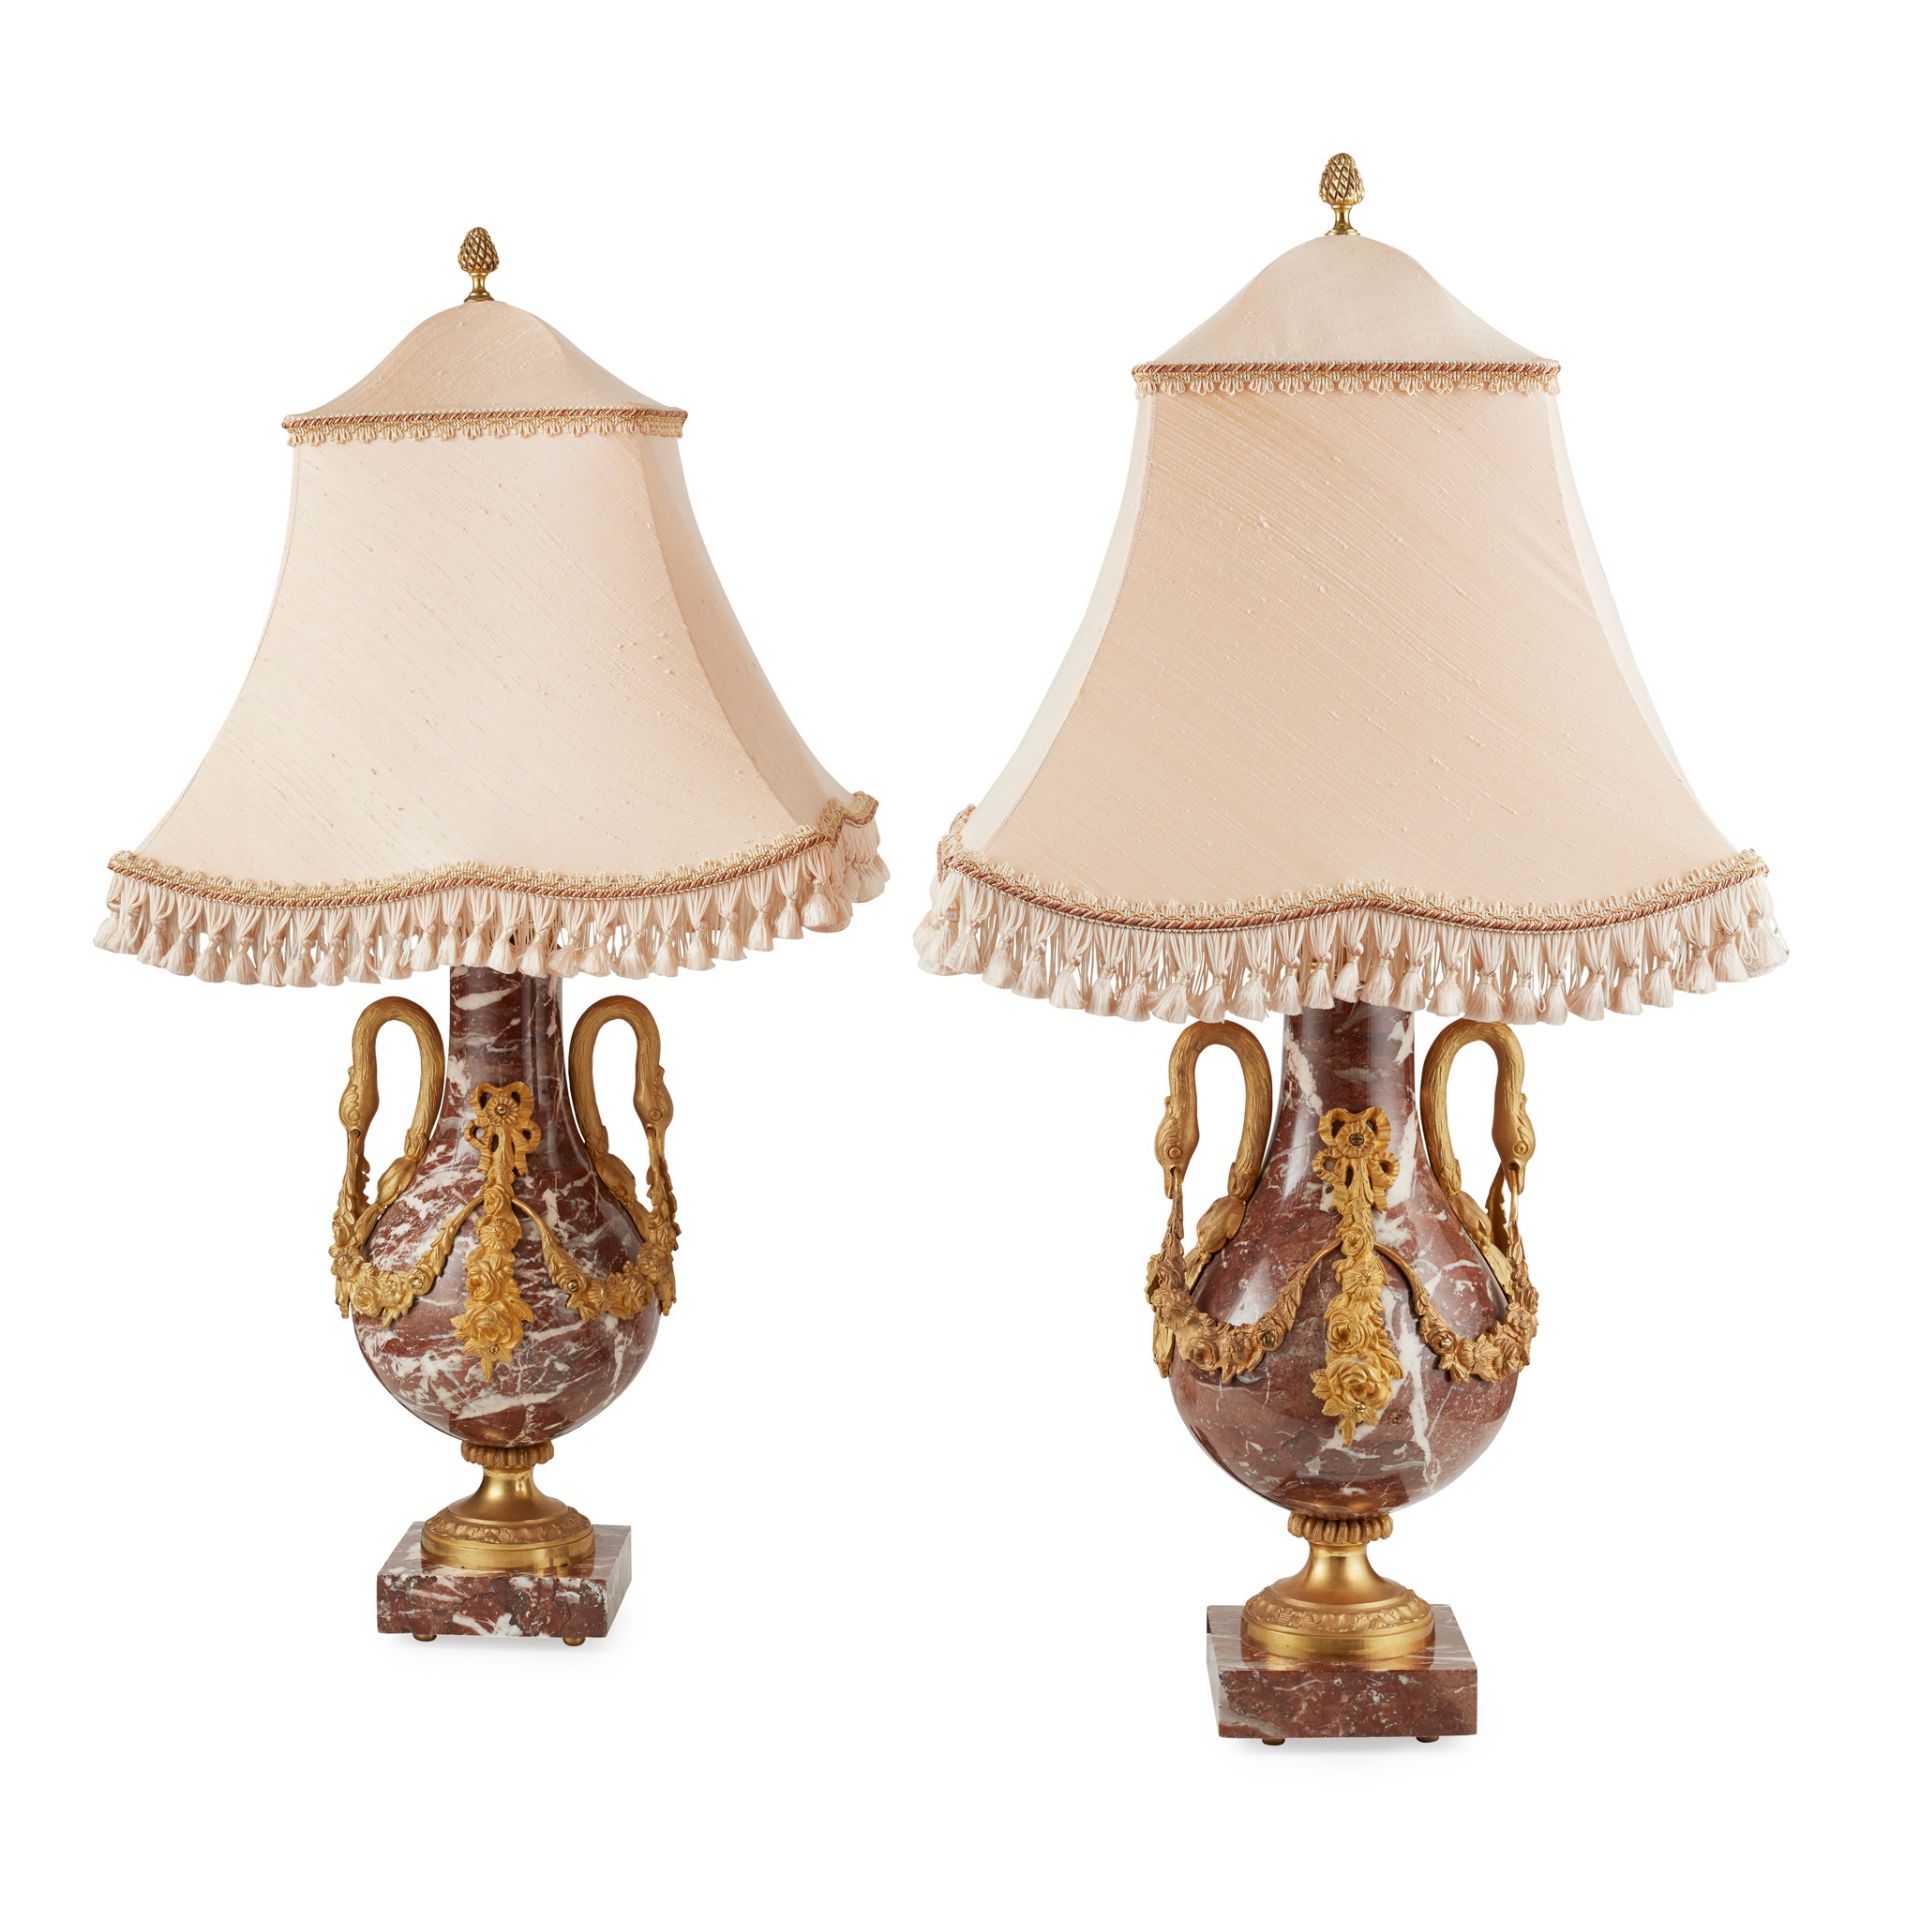 PAIR OF LOUIS XVI STYLE ROUGE MARBLE AND GILT METAL MOUNTED LAMPS LATE 19TH/ EARLY 20TH CENTURY - Image 2 of 2